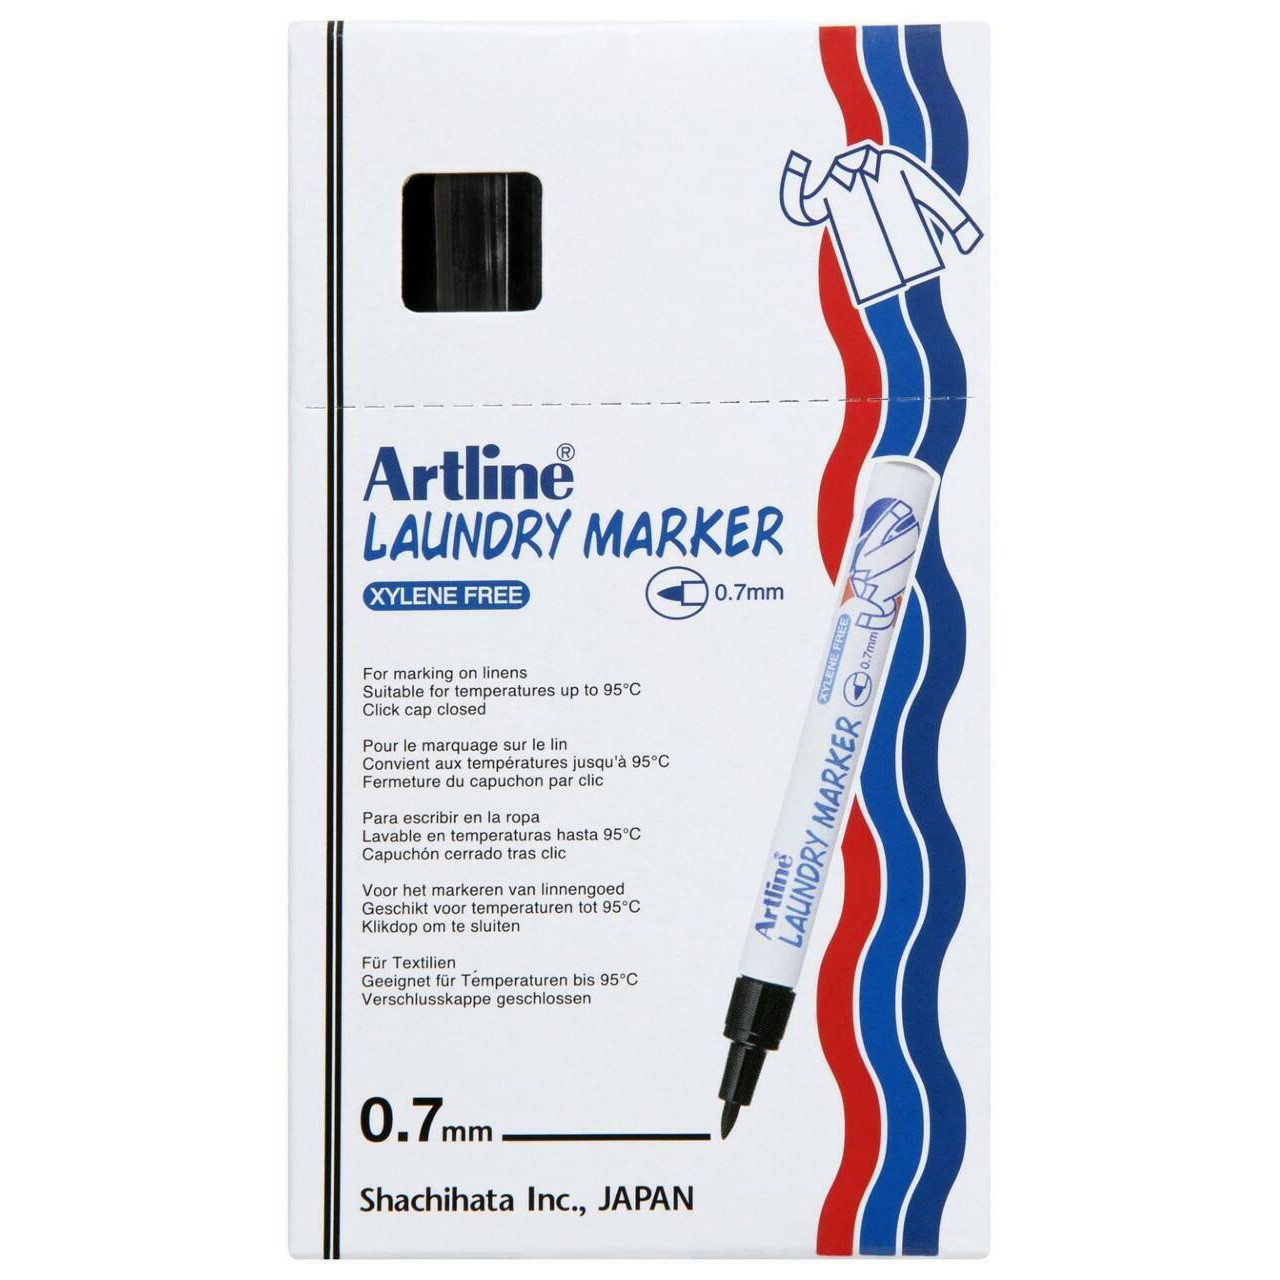 750/EKC-1 Artline Black Laundry Marker and White Fabric Marker (Twin Pack)